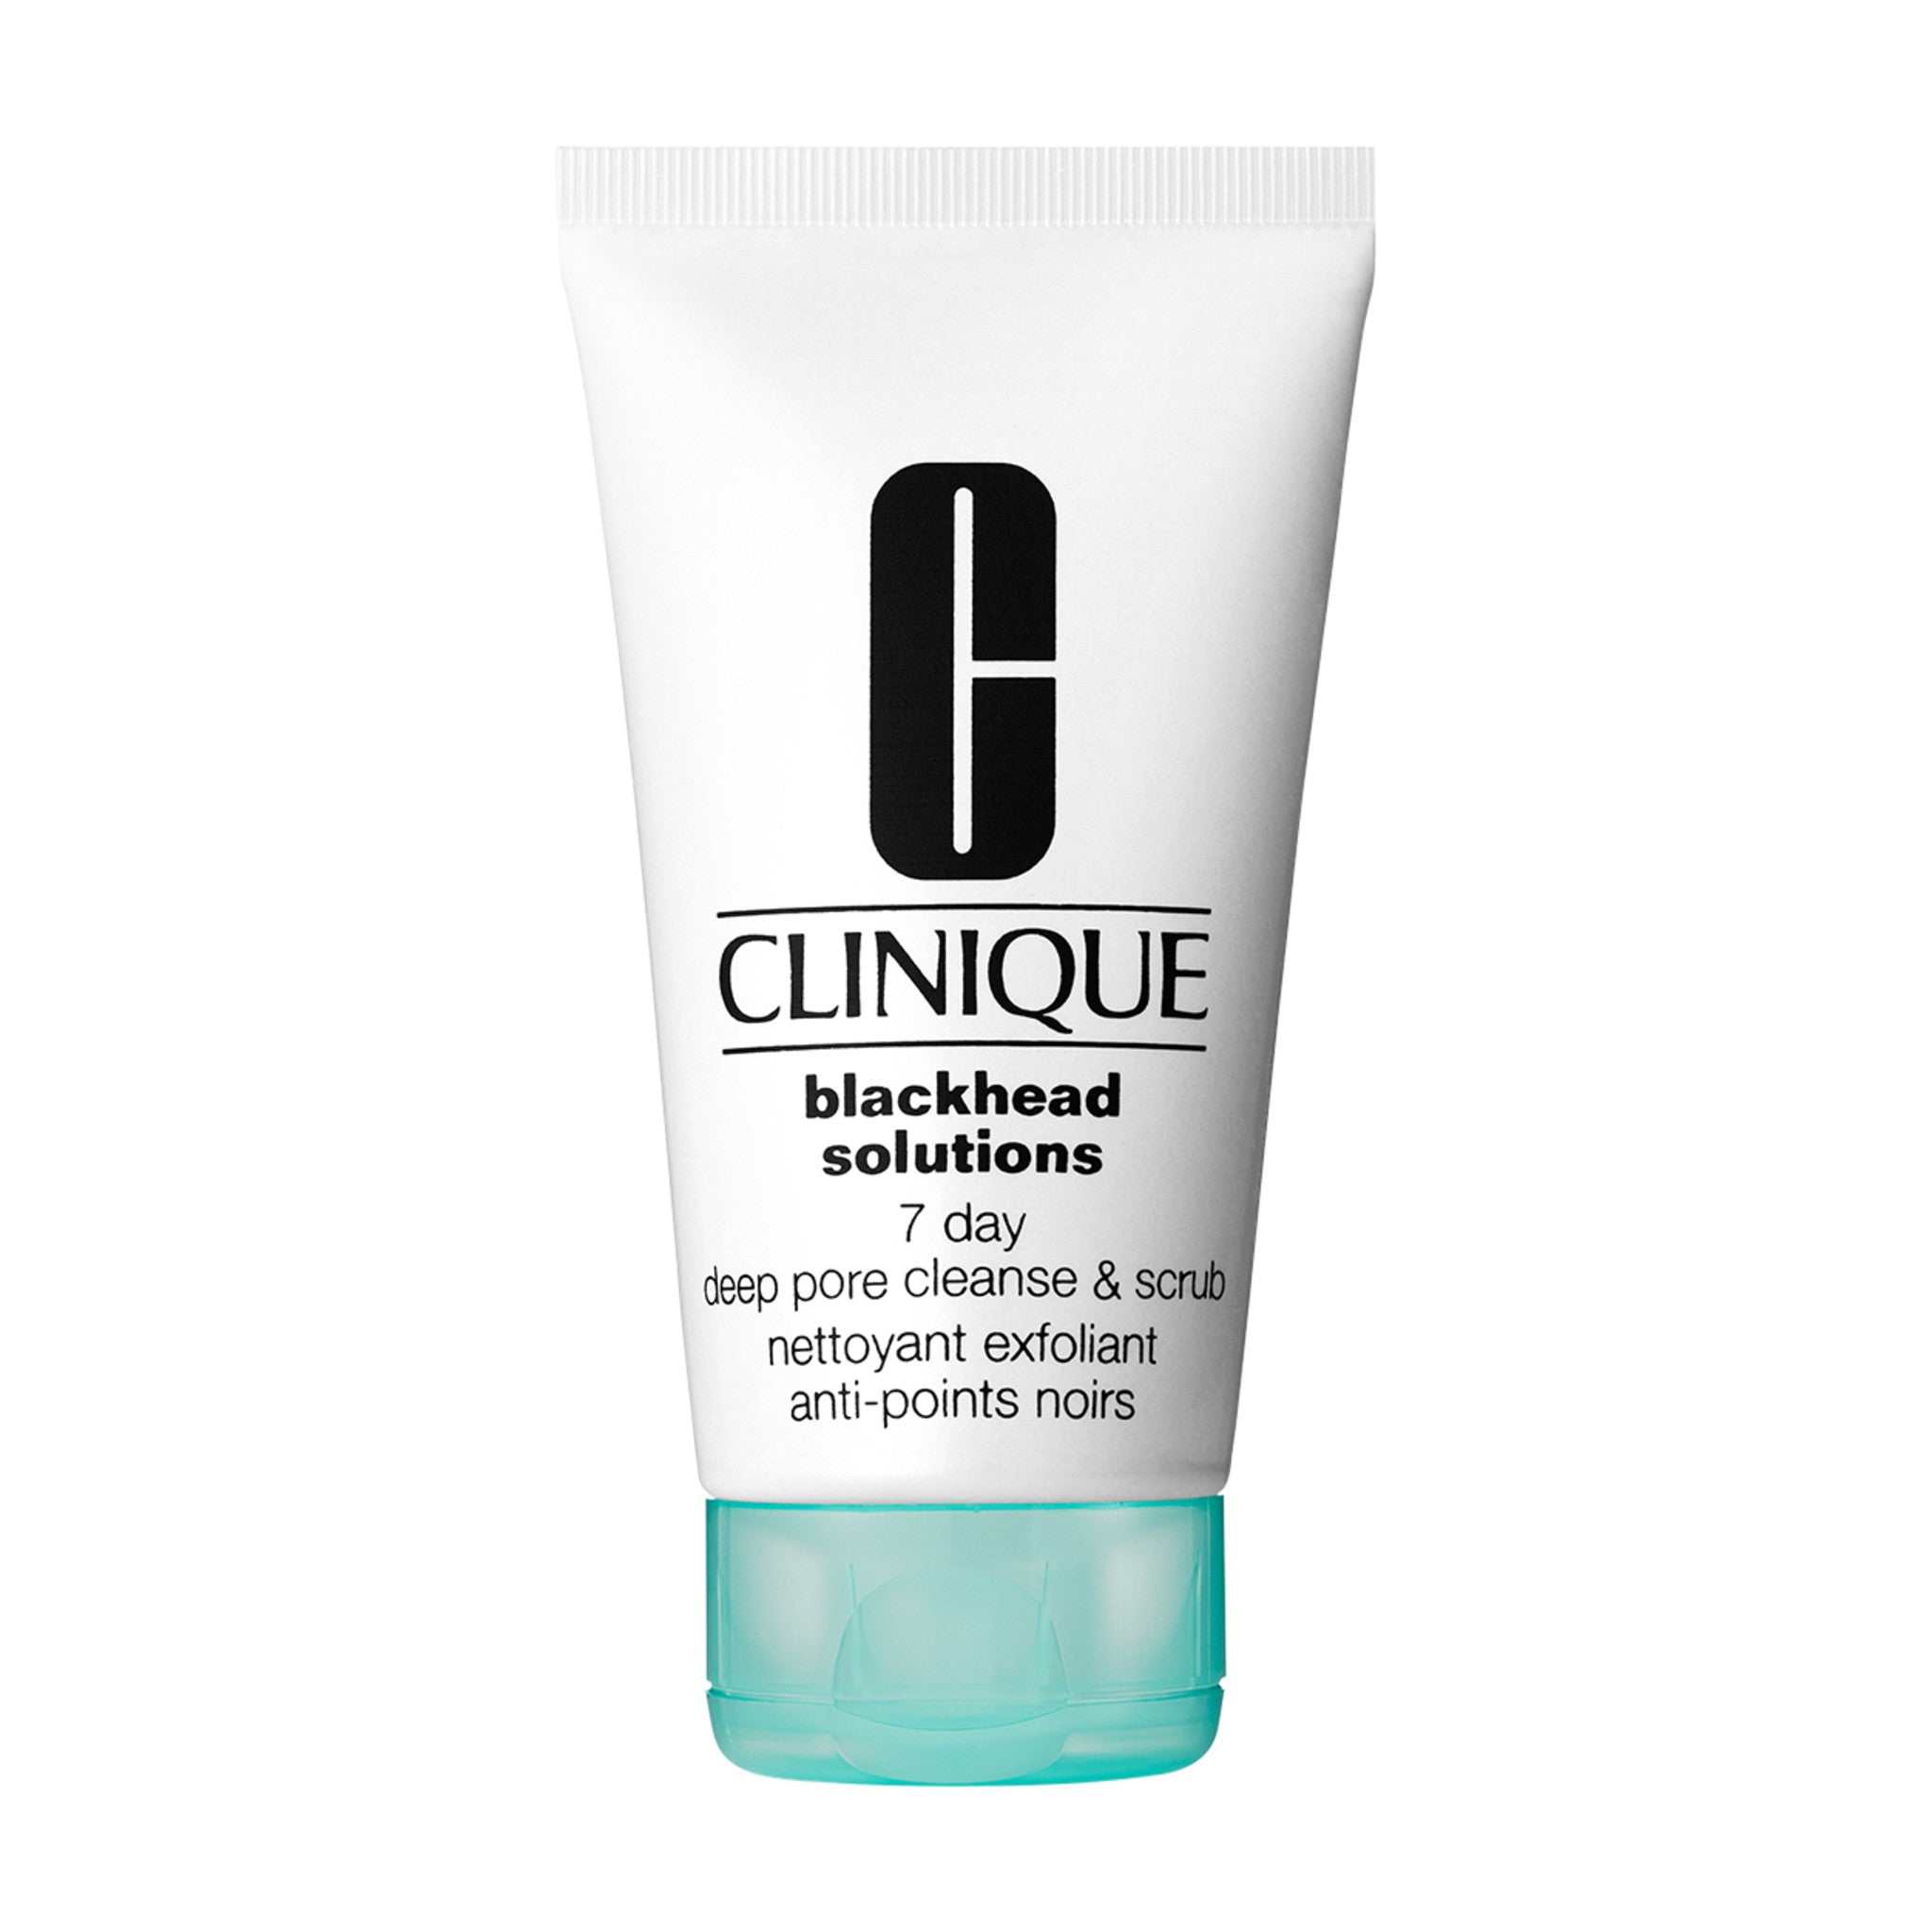 Clinique Blackhead Solutions 7 Day Deep Pore Cleanse and Scrub main image.